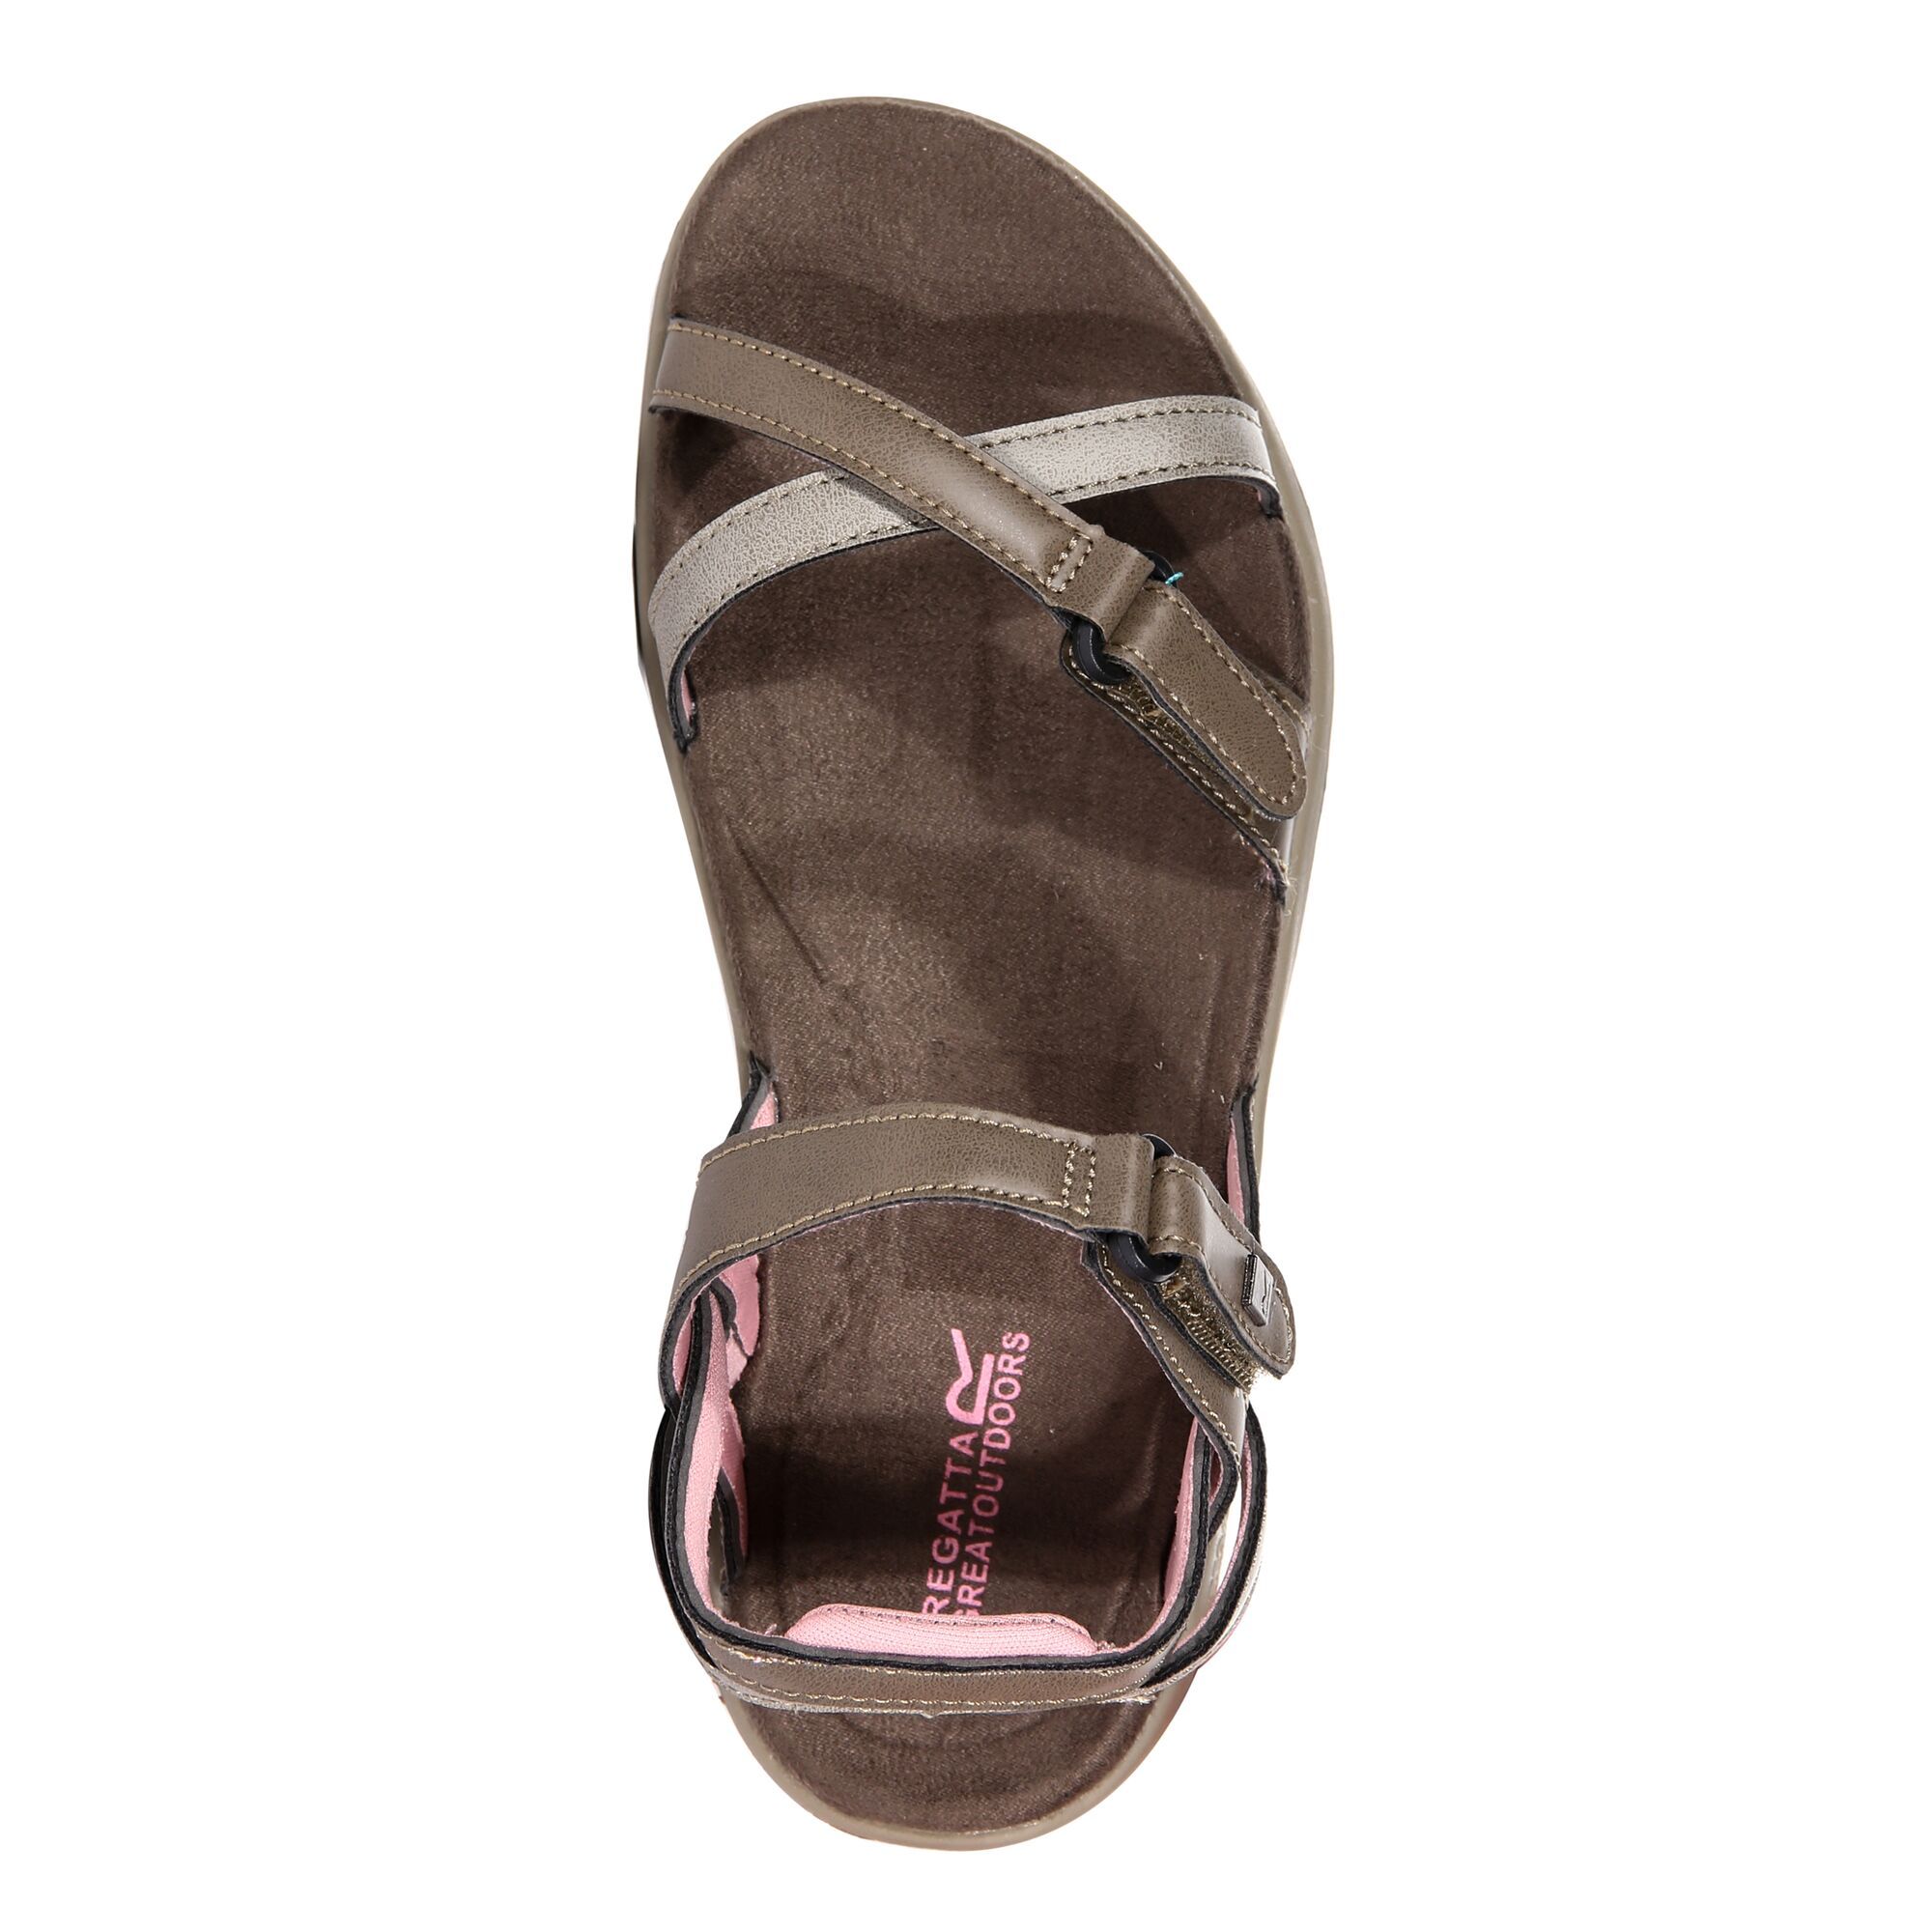 The Lady Santa Cruz is our summery everyday sandal with a stylish criss-cross design and adjustable straps for the perfect fit. The robust rubber outsole offers fantastic grip on pebbly beaches and uneven paths while the EVA-cushioned midsole provides plenty of shock absorption for all-day comfort in wear. We added a soft and stretchy spandex lining and a light textile covering on the footbed to help prevent any nasty rubbing. Polyamide 5%, Other Fibres/Materials 95%.